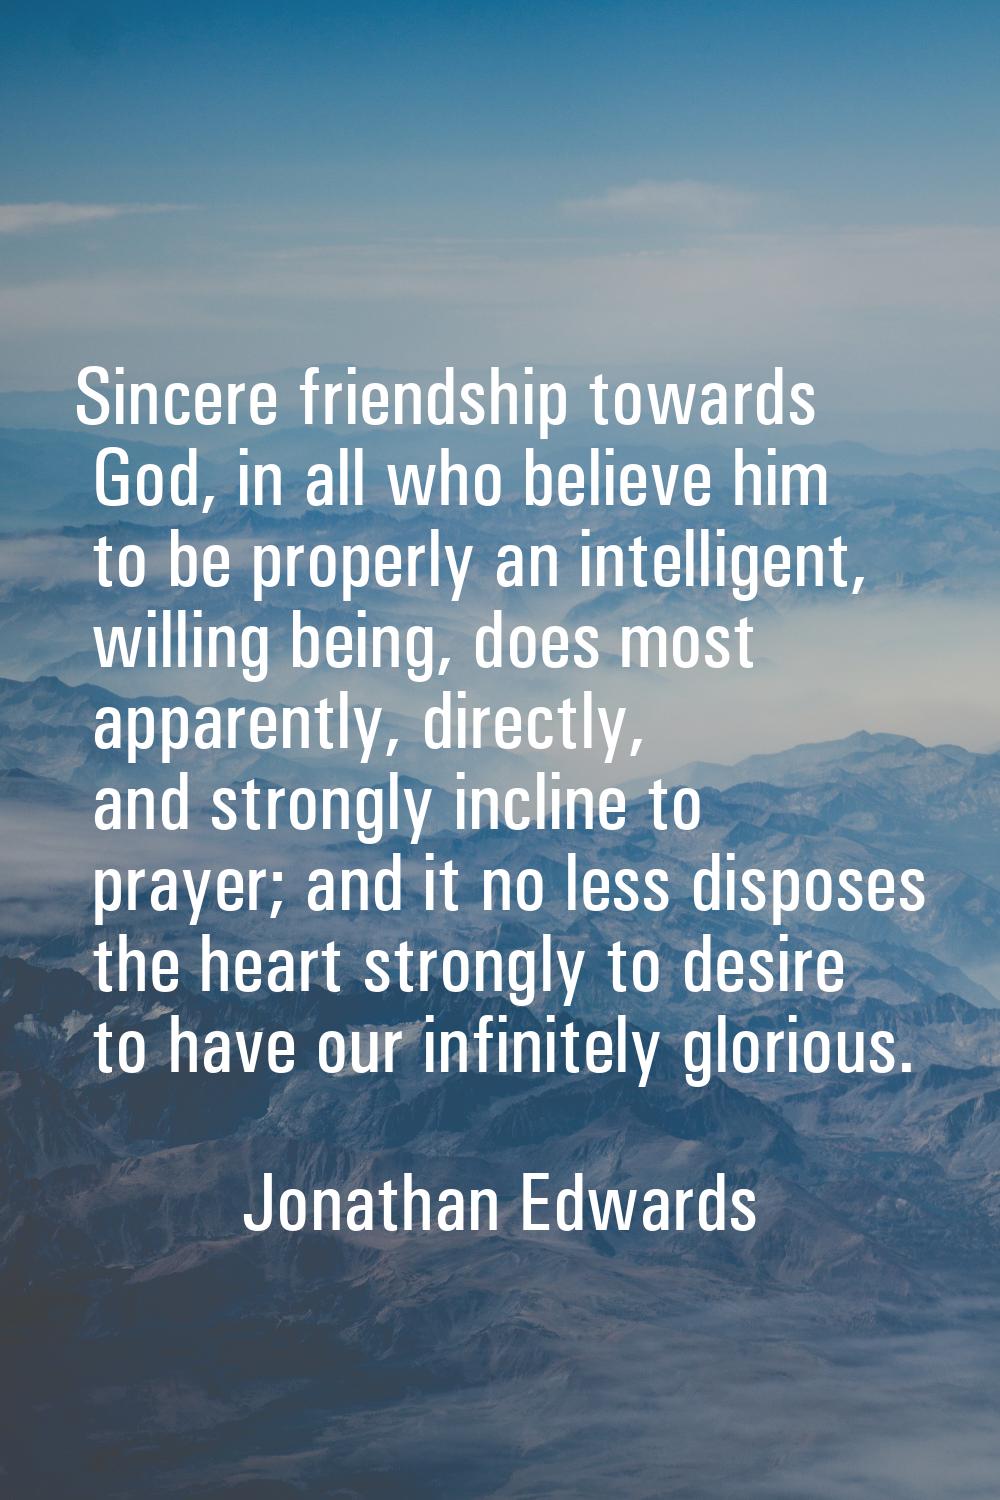 Sincere friendship towards God, in all who believe him to be properly an intelligent, willing being